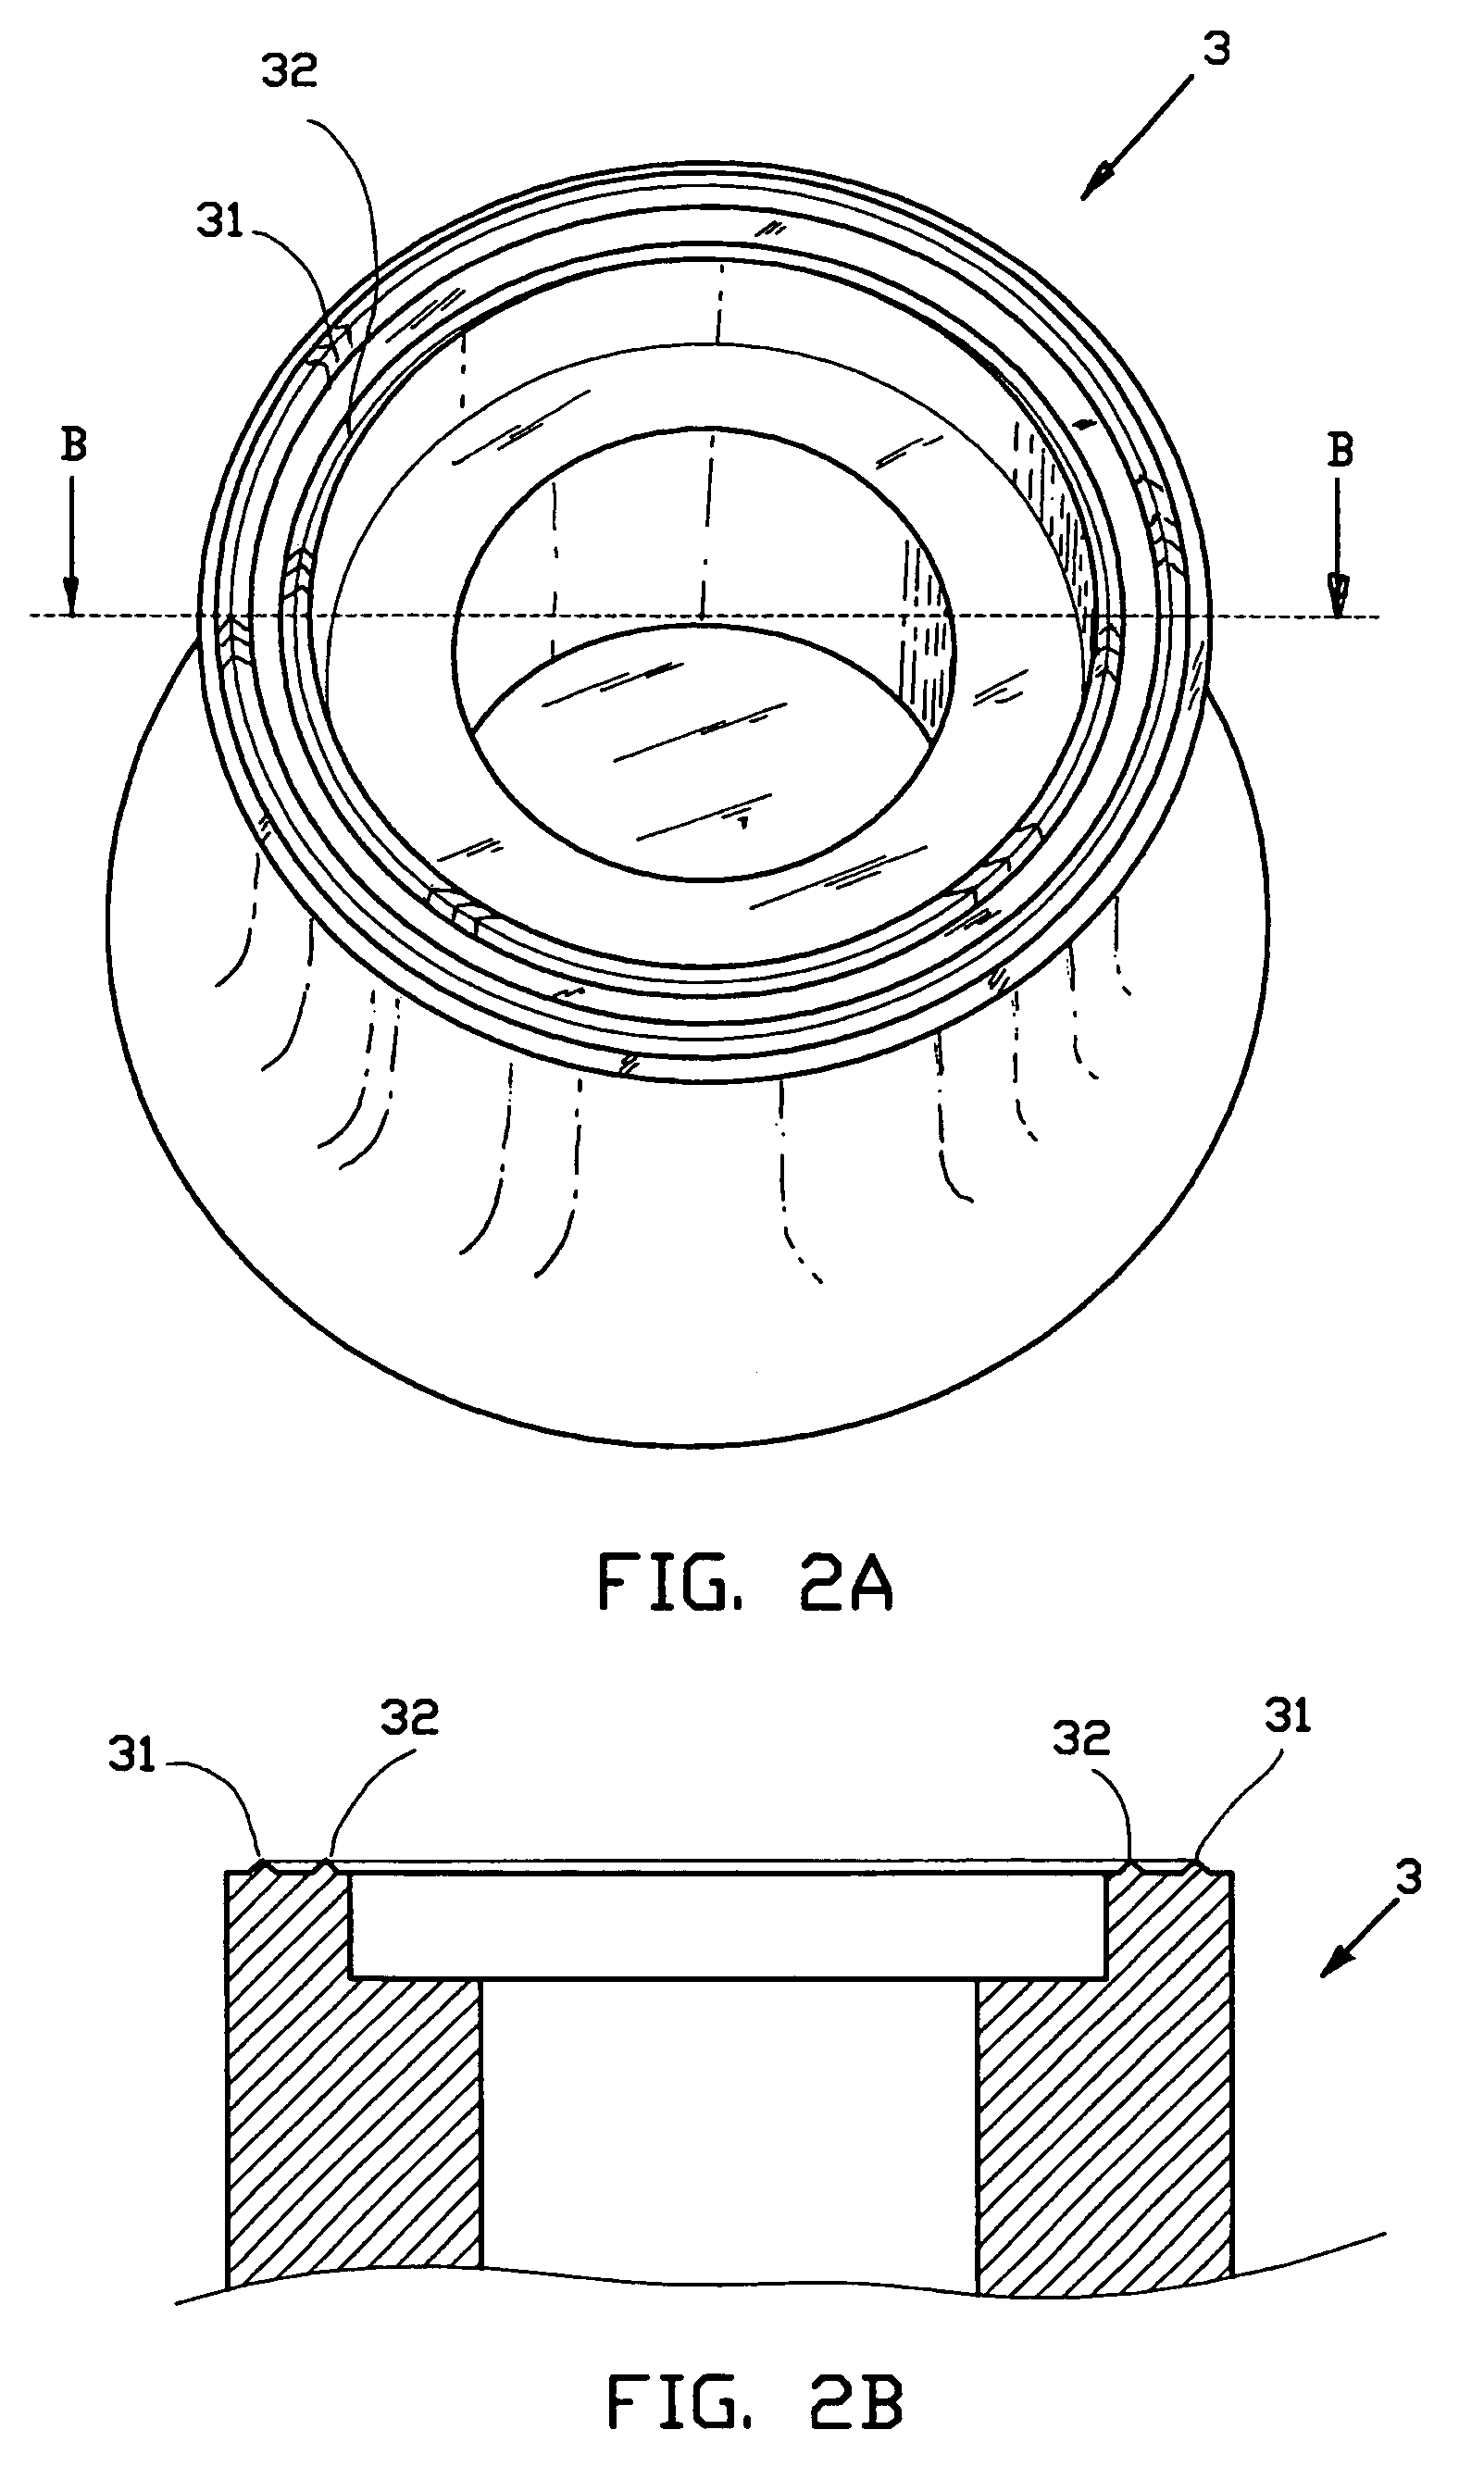 Method for bonding a body side wafer of a stoma system and a further component of said stoma system with each other